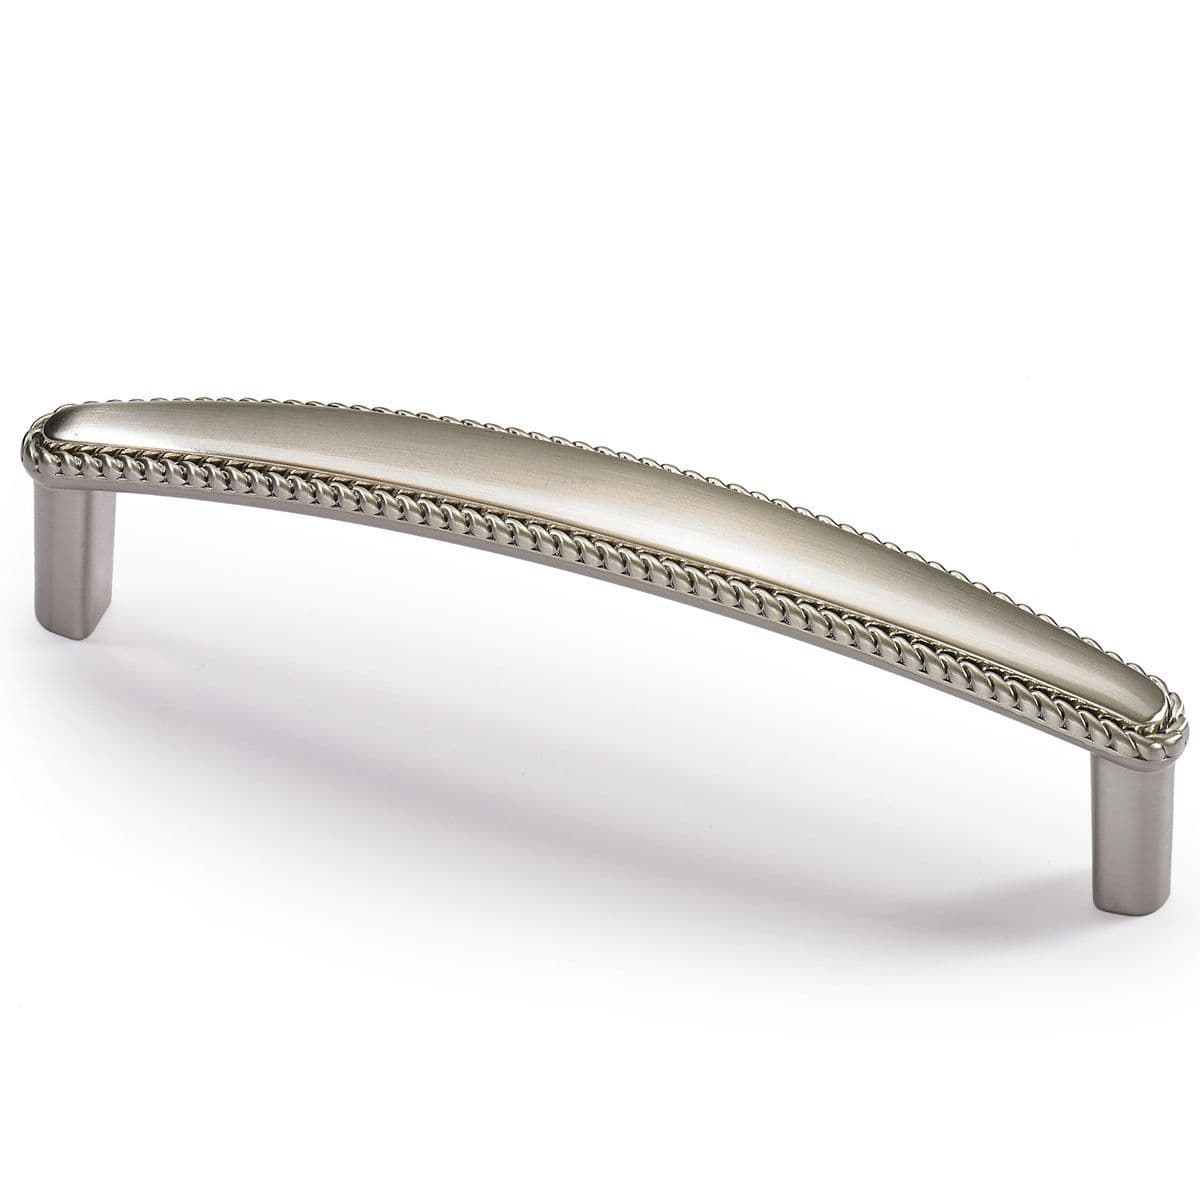 SAVELLI D Cupboard Handle - 128mm h/c size - BRUSHED STAINLESS STEEL LOOK (HETTICH - Folk)